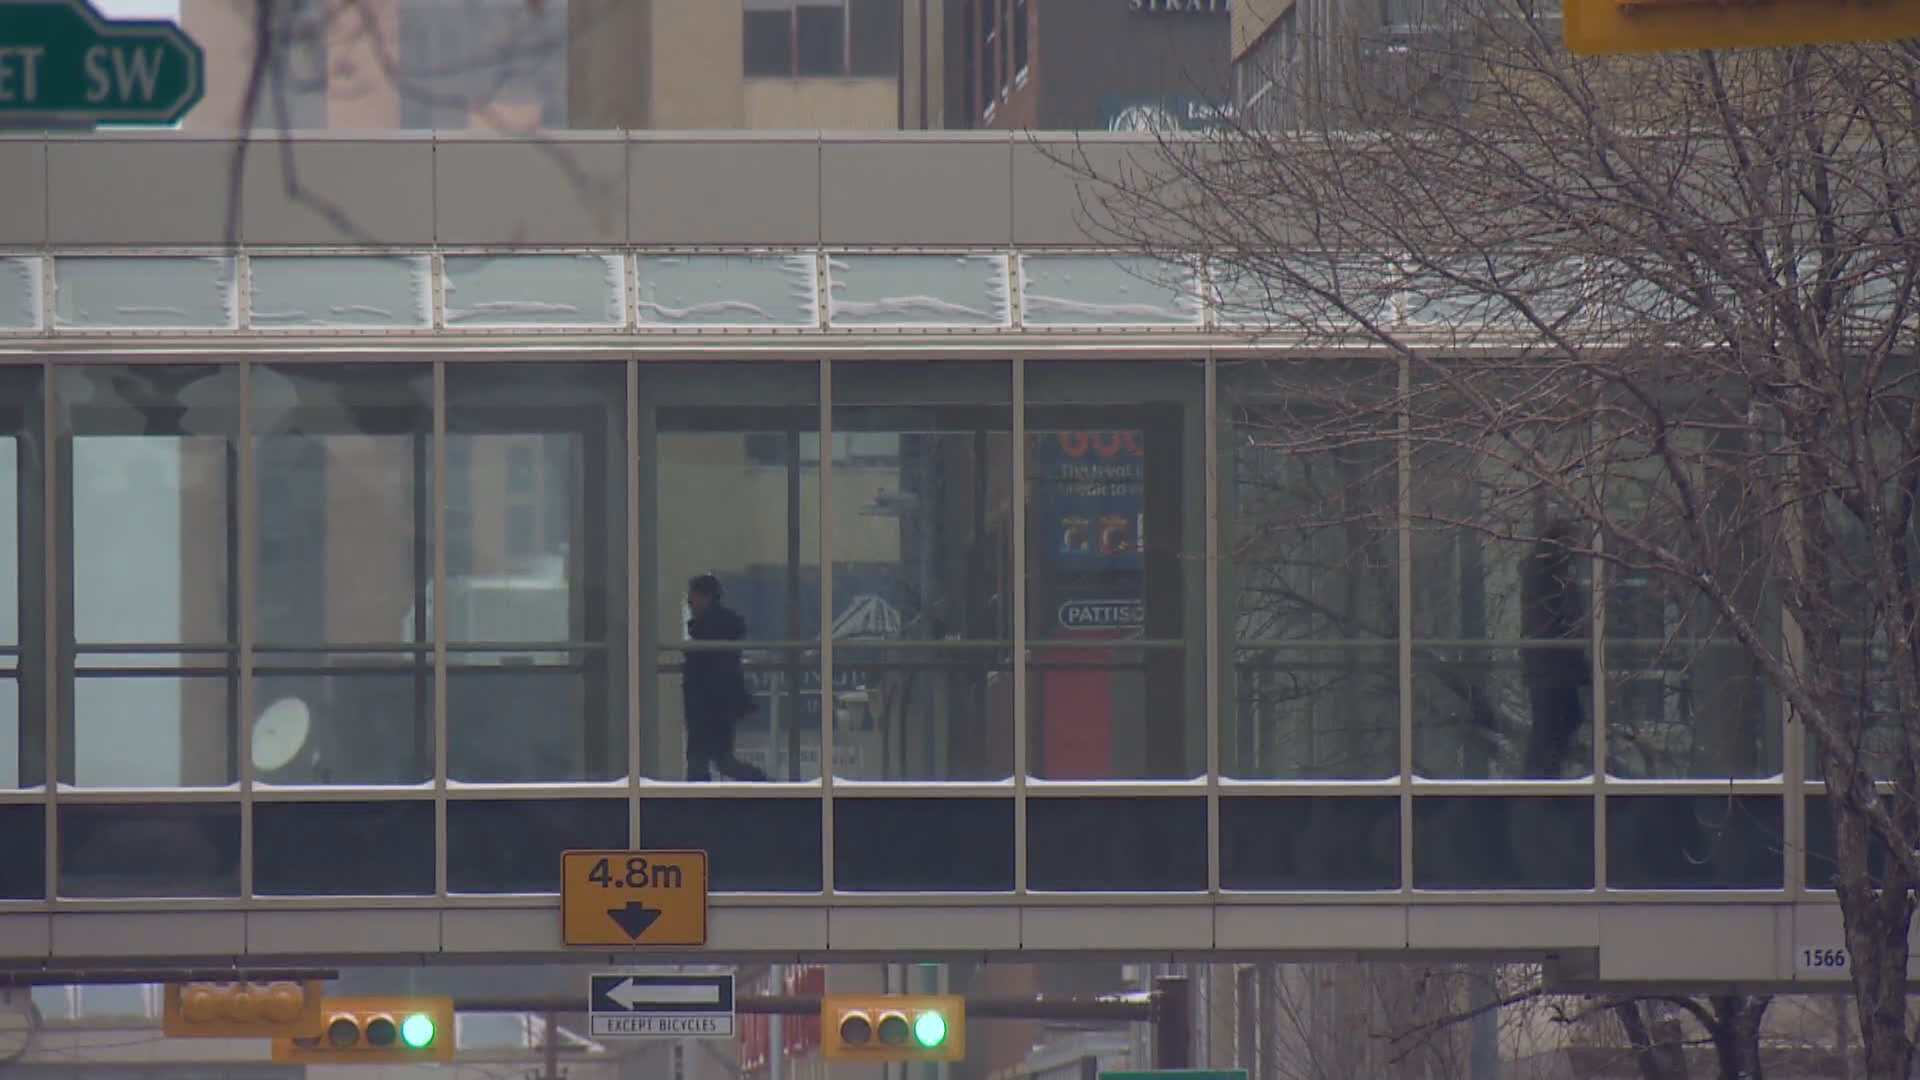 Review of Calgary’s Plus 15 and social supports among downtown safety panel’s recommendations